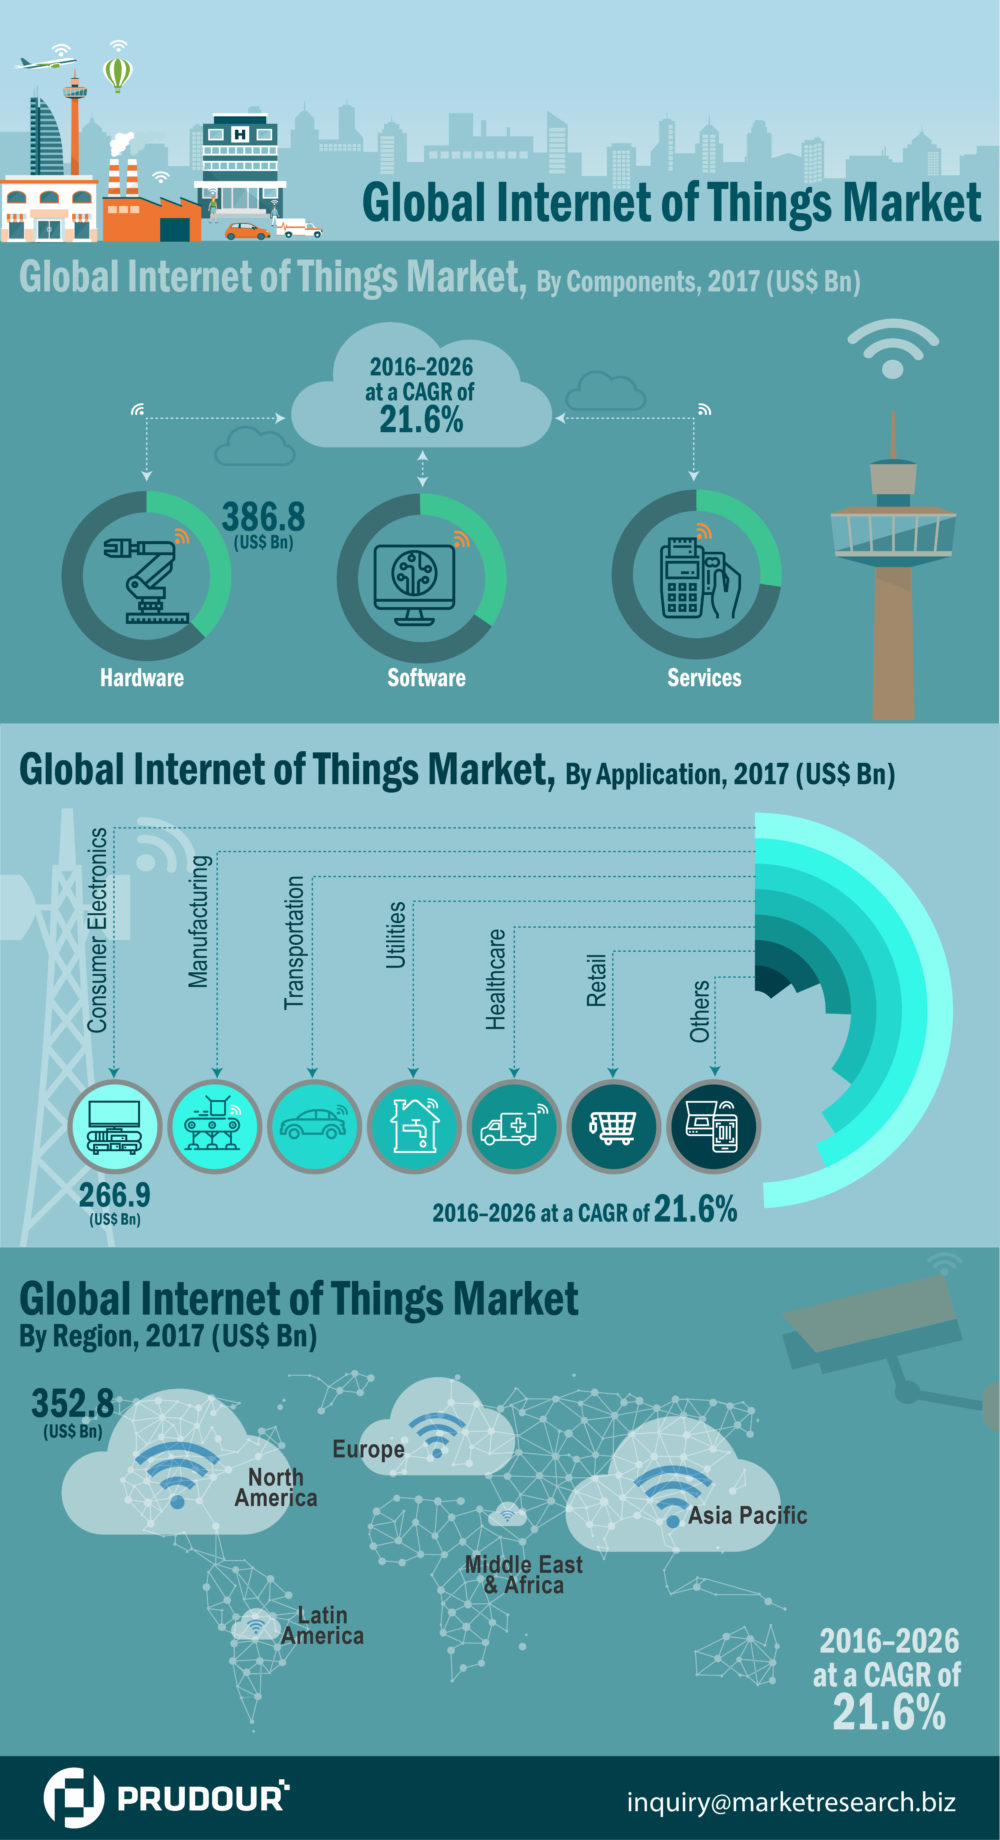 2021 US$ 7,760.8 Bn: Global Internet of Things Market is expected to reach US$ 7,760.8 Bn in 2021